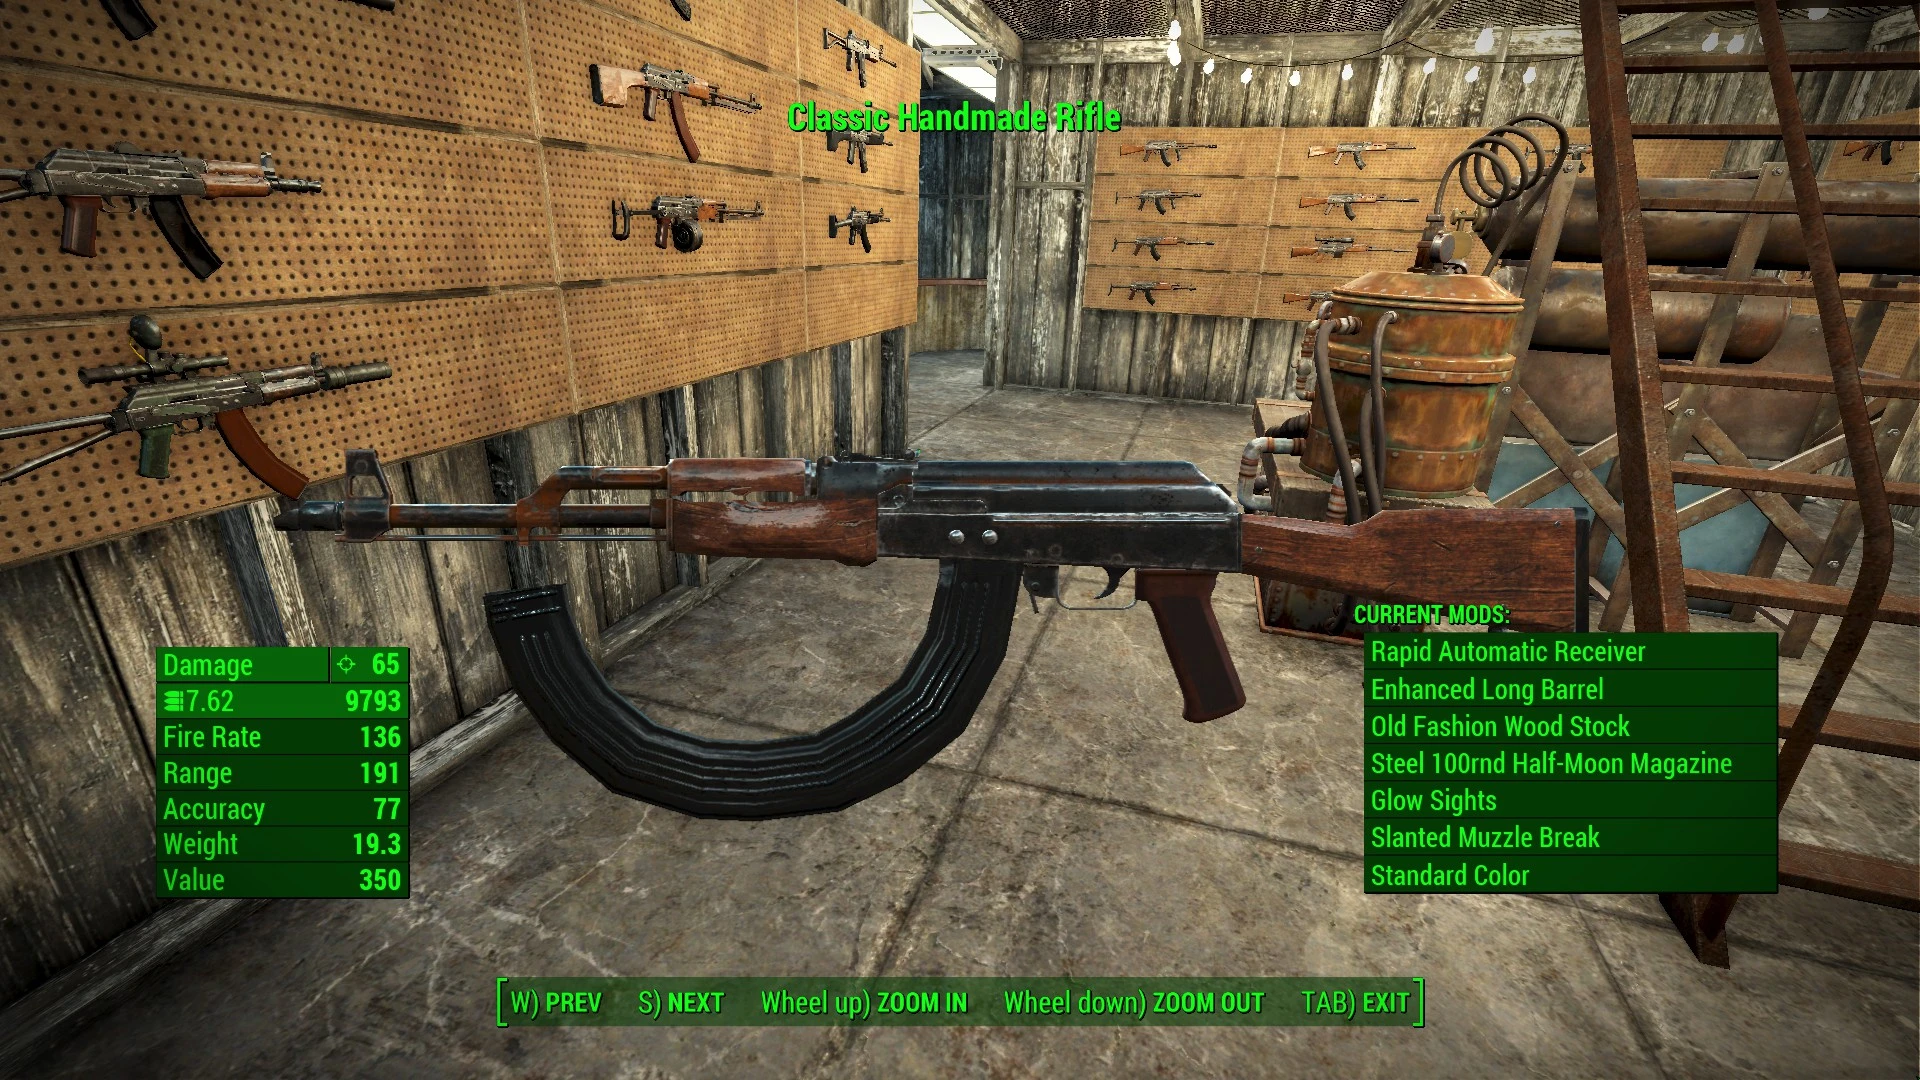 Fallout 4 handmade rifle in commonwealth фото 14